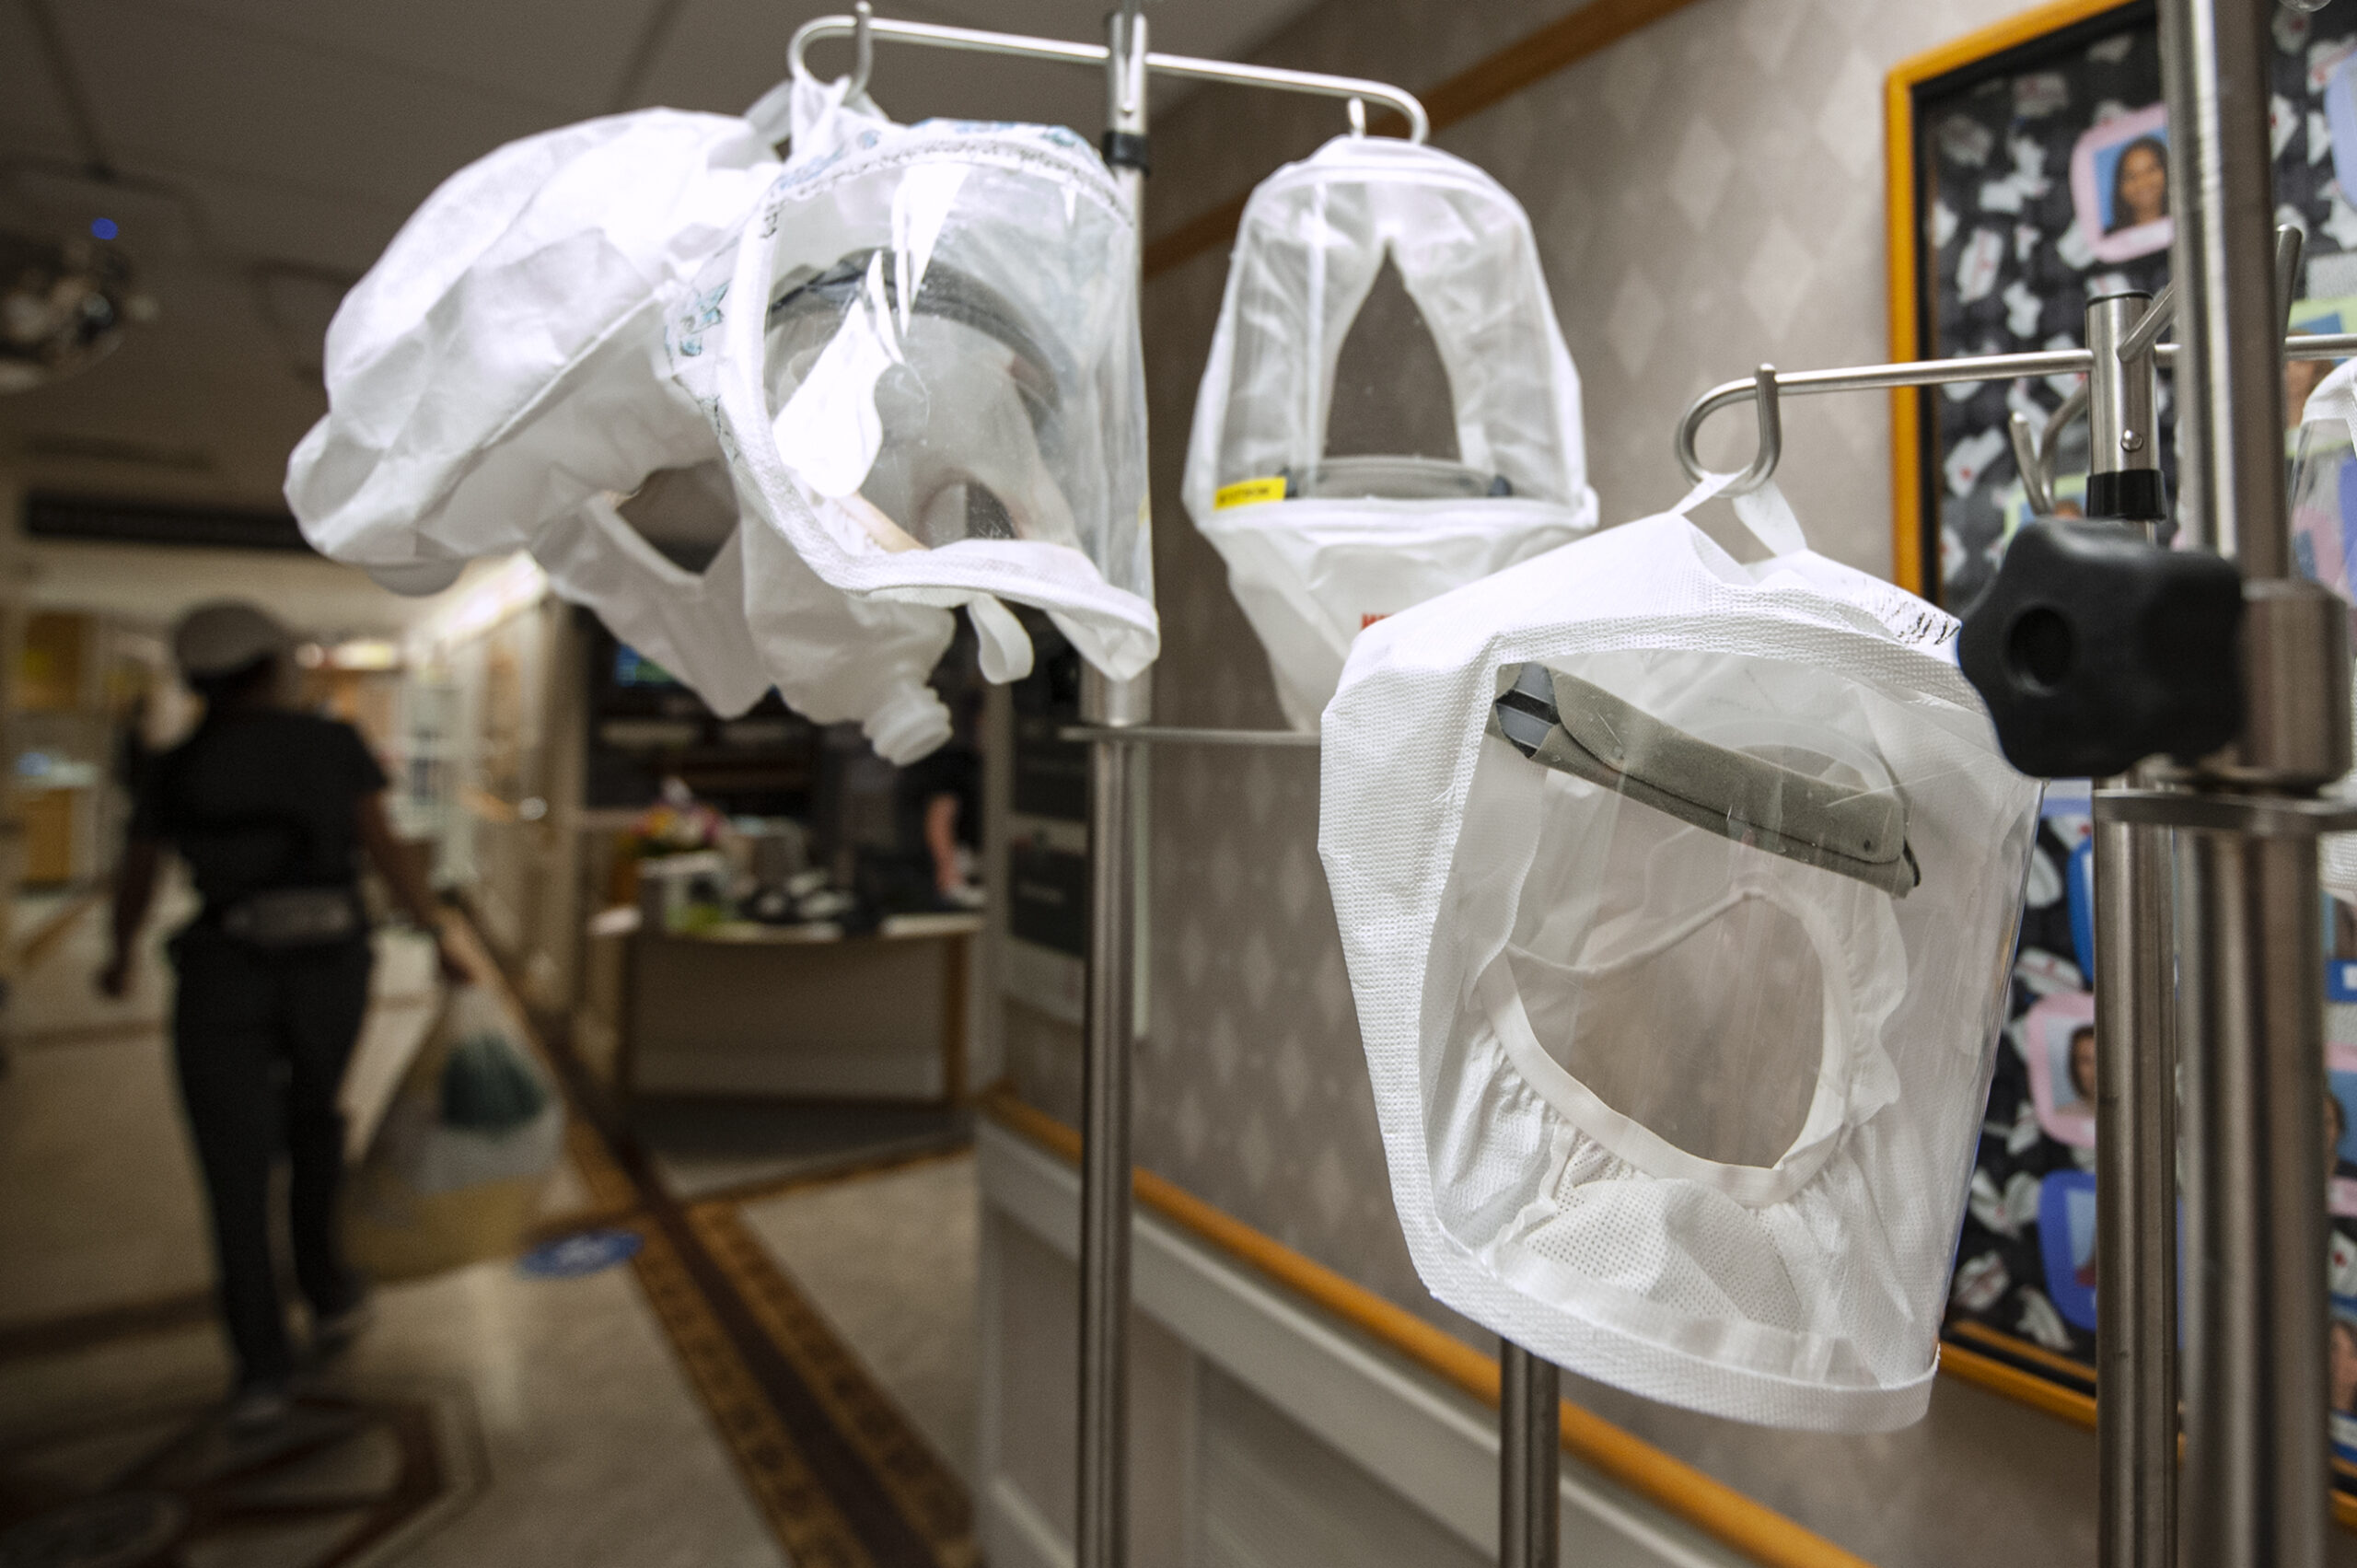 Large protective hoods hang on a rack in a hospital hallway